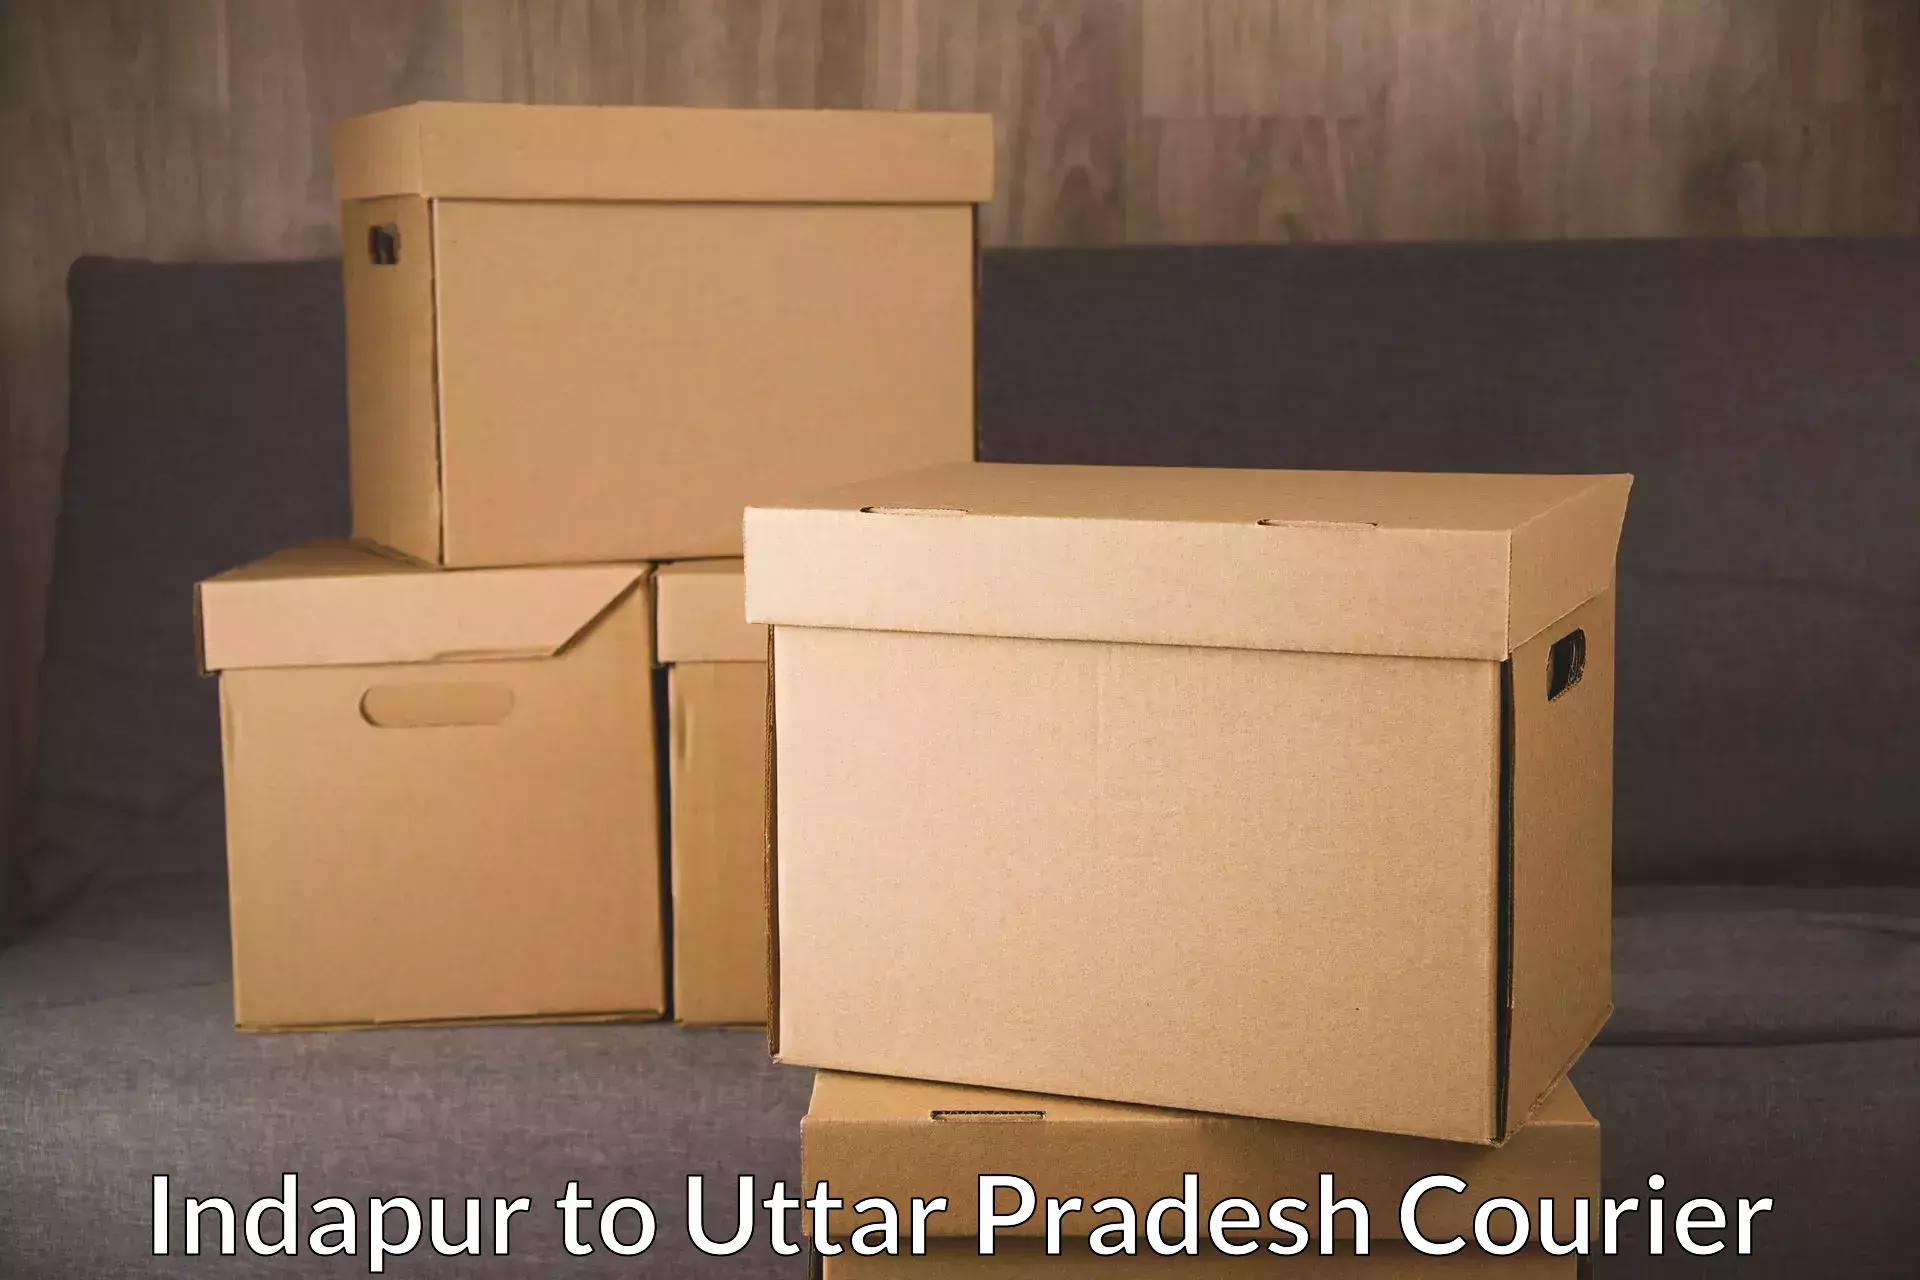 Overnight delivery services in Indapur to Uttar Pradesh